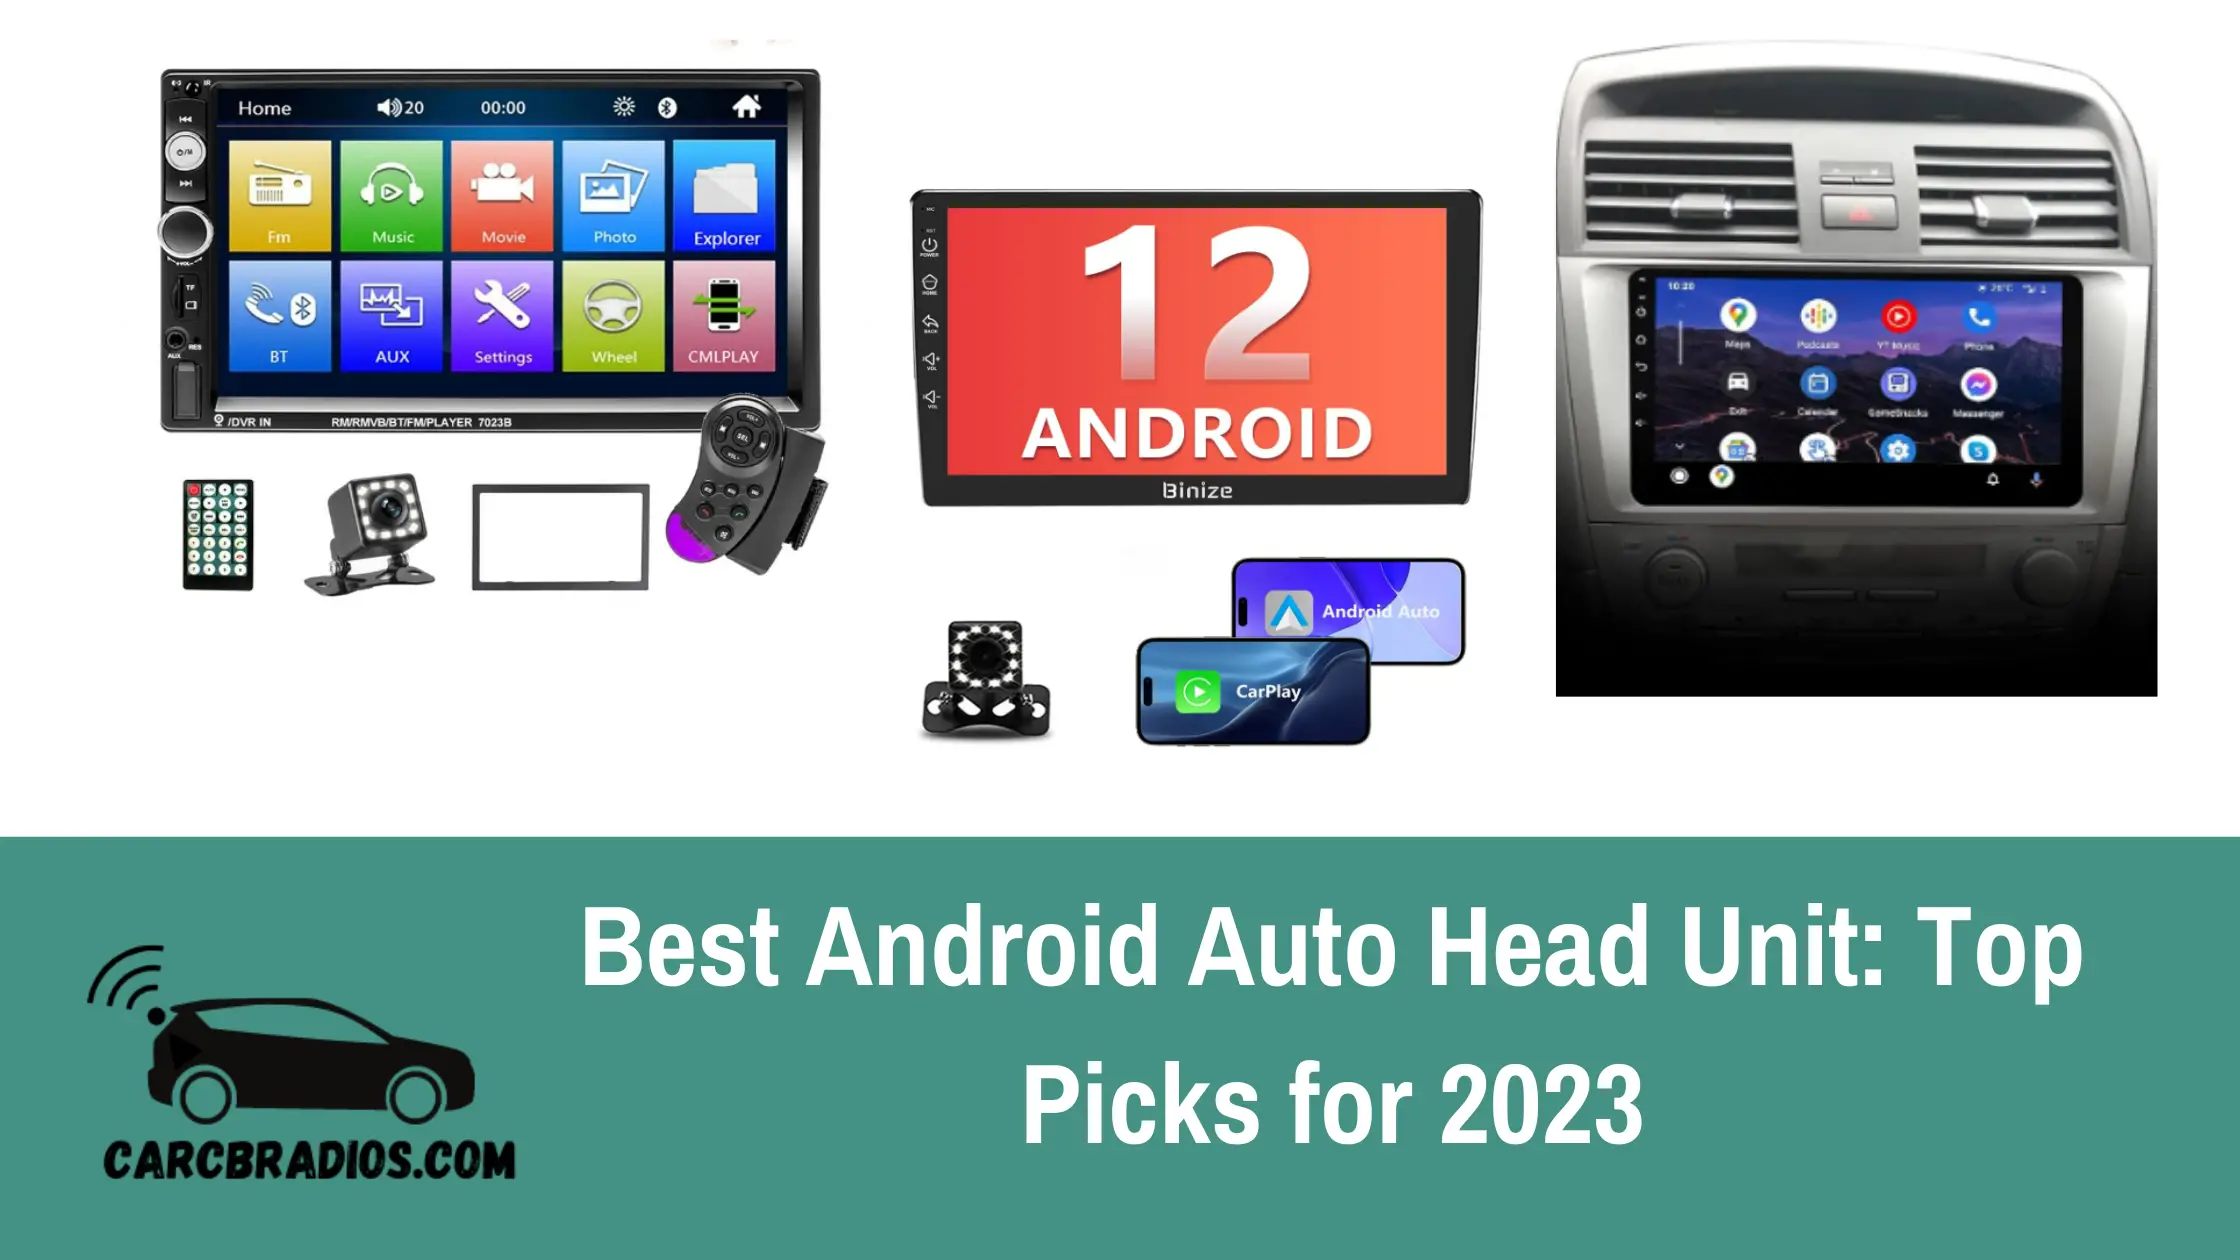 When choosing the best Android Auto head unit, there are several critical factors to consider. The first is compatibility with your car's make and model. Some head units are designed specifically for certain car brands, while others are more universal. The second is the size of the head unit, as it needs to fit in your car's dashboard properly. Finally, you'll want to consider the features and functionality of the head unit, such as display size, resolution, and audio quality.